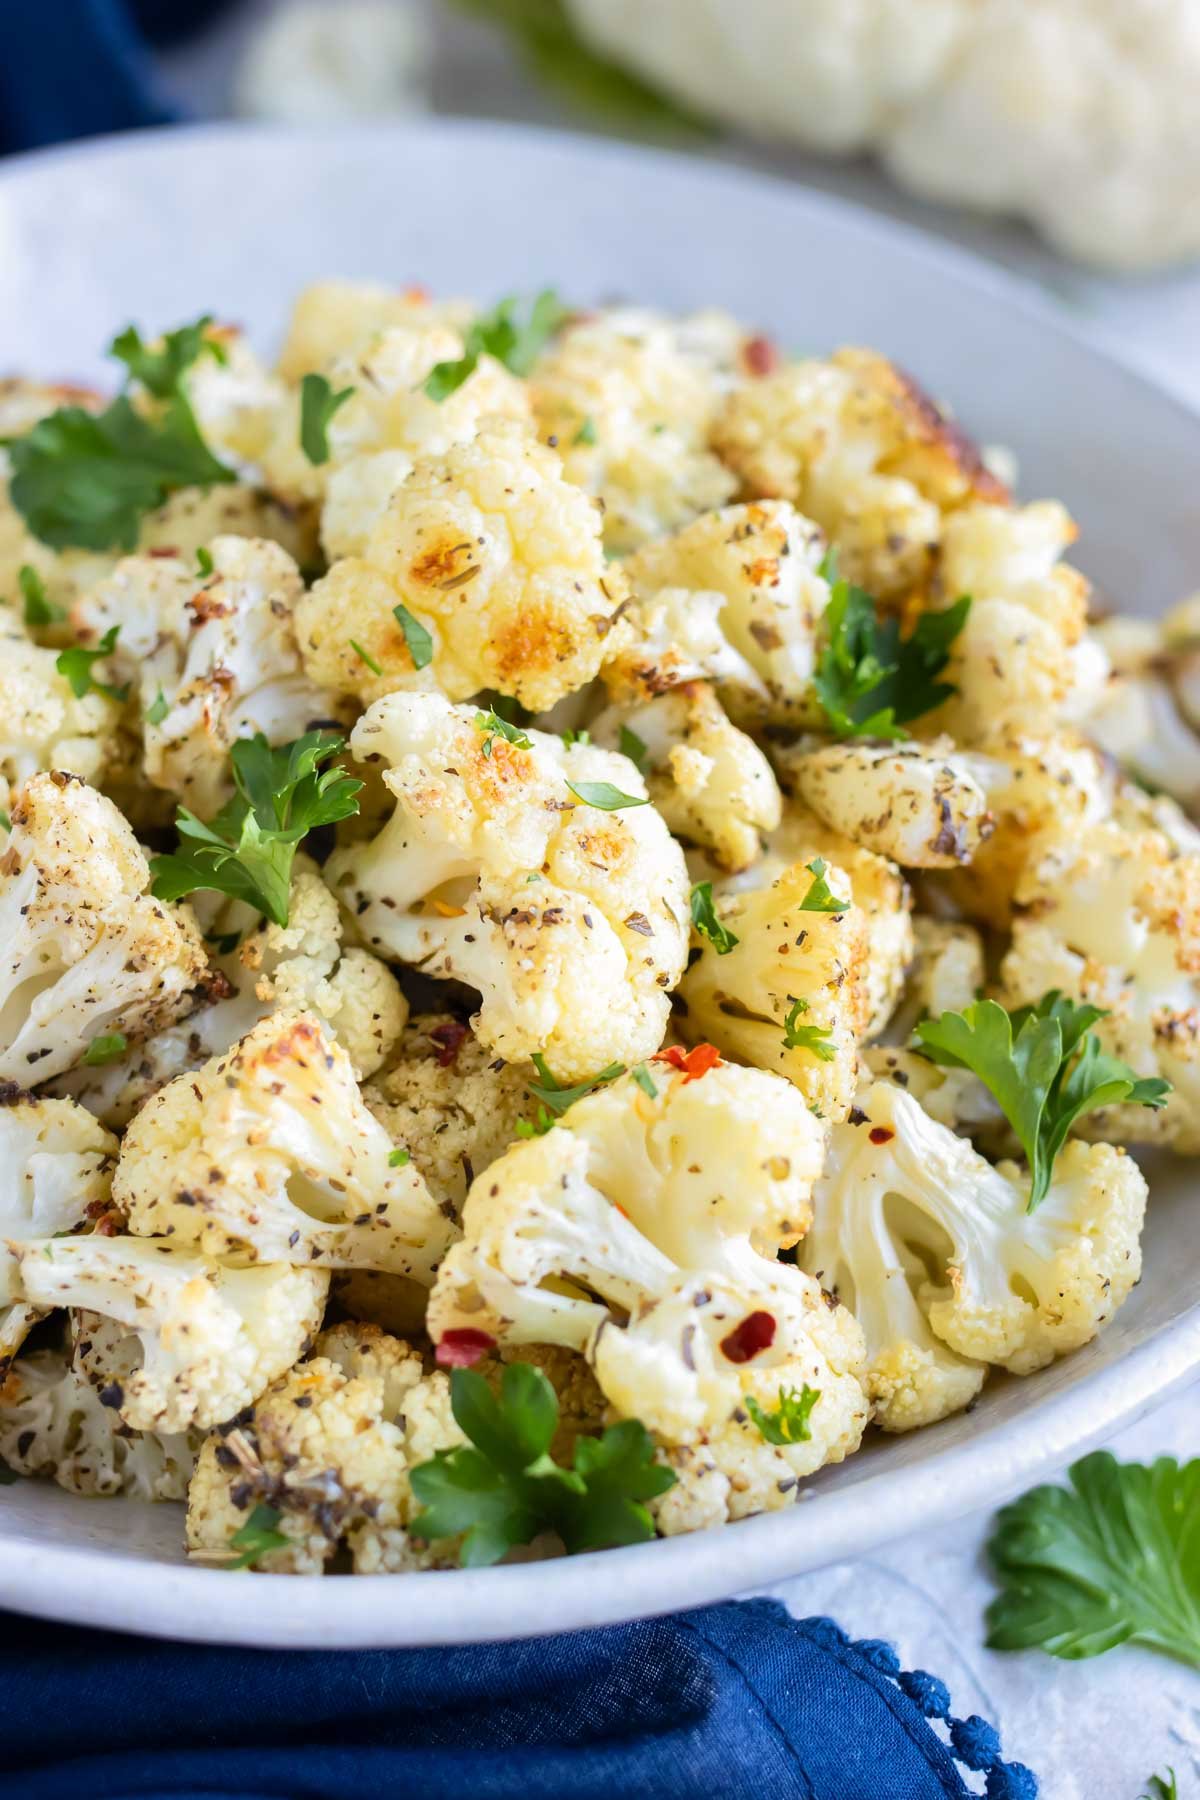 A bowl full of an easy, low-carb, and keto cauliflower recipe.